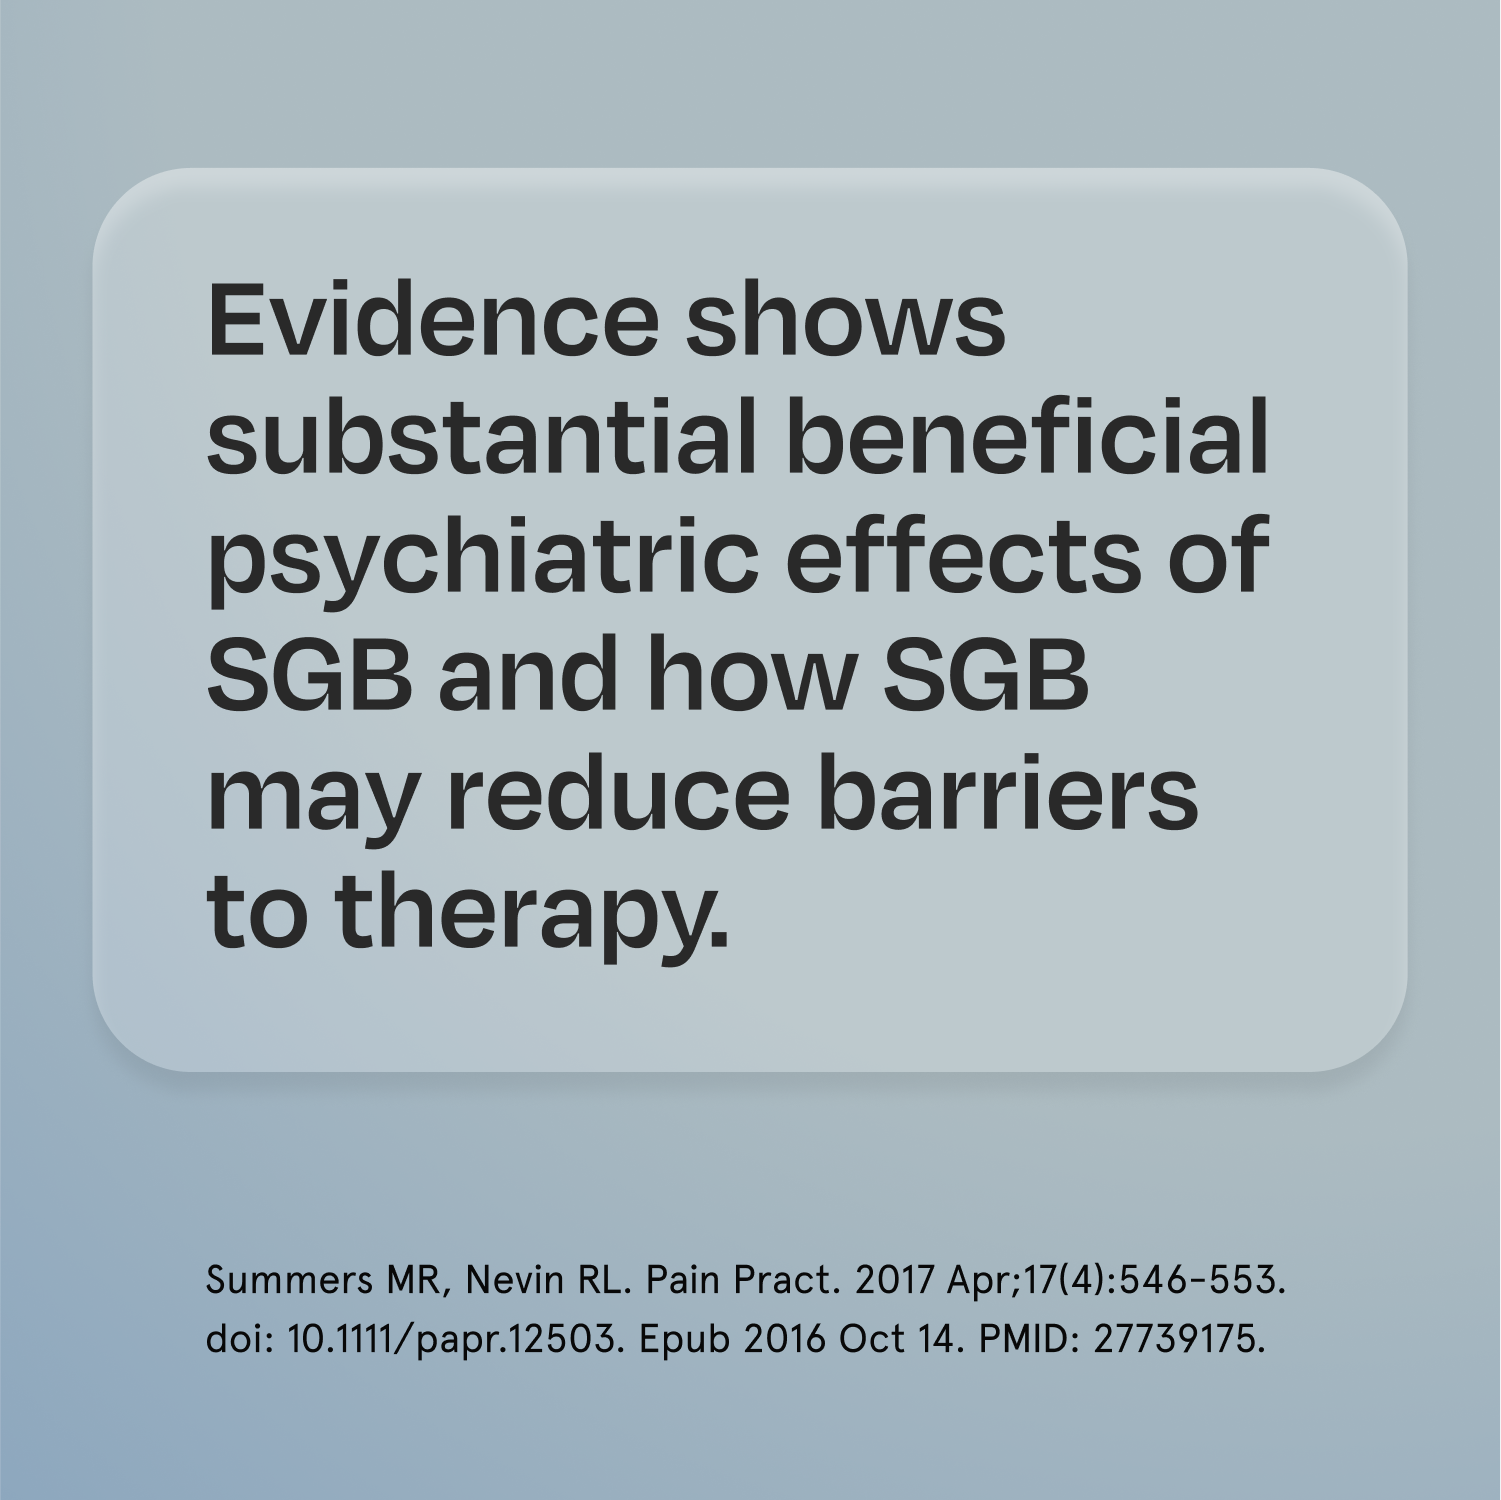 Evidence shows substantial beneficial psychiatric effects of sgb and how sgb may reduce barriers to therapy